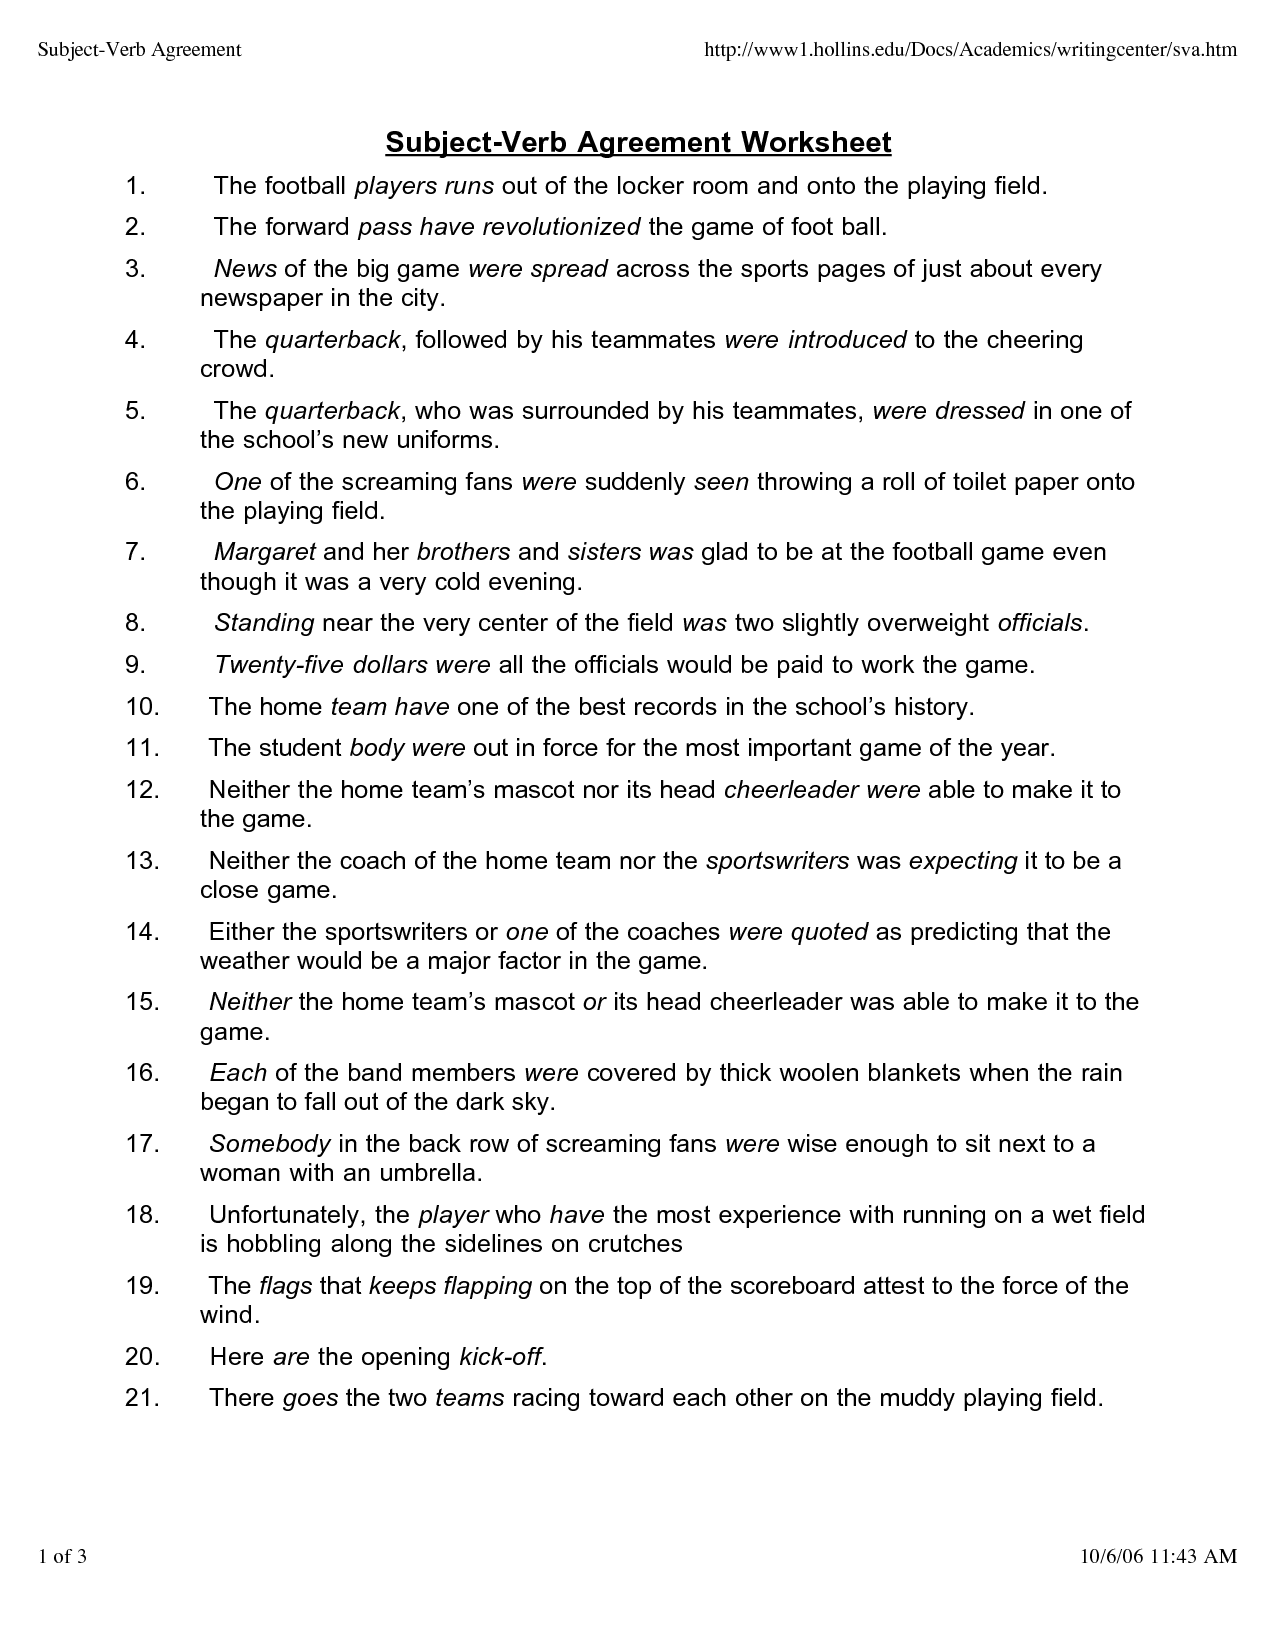 12-best-images-of-subject-verb-agreement-worksheets-3rd-grade-mall